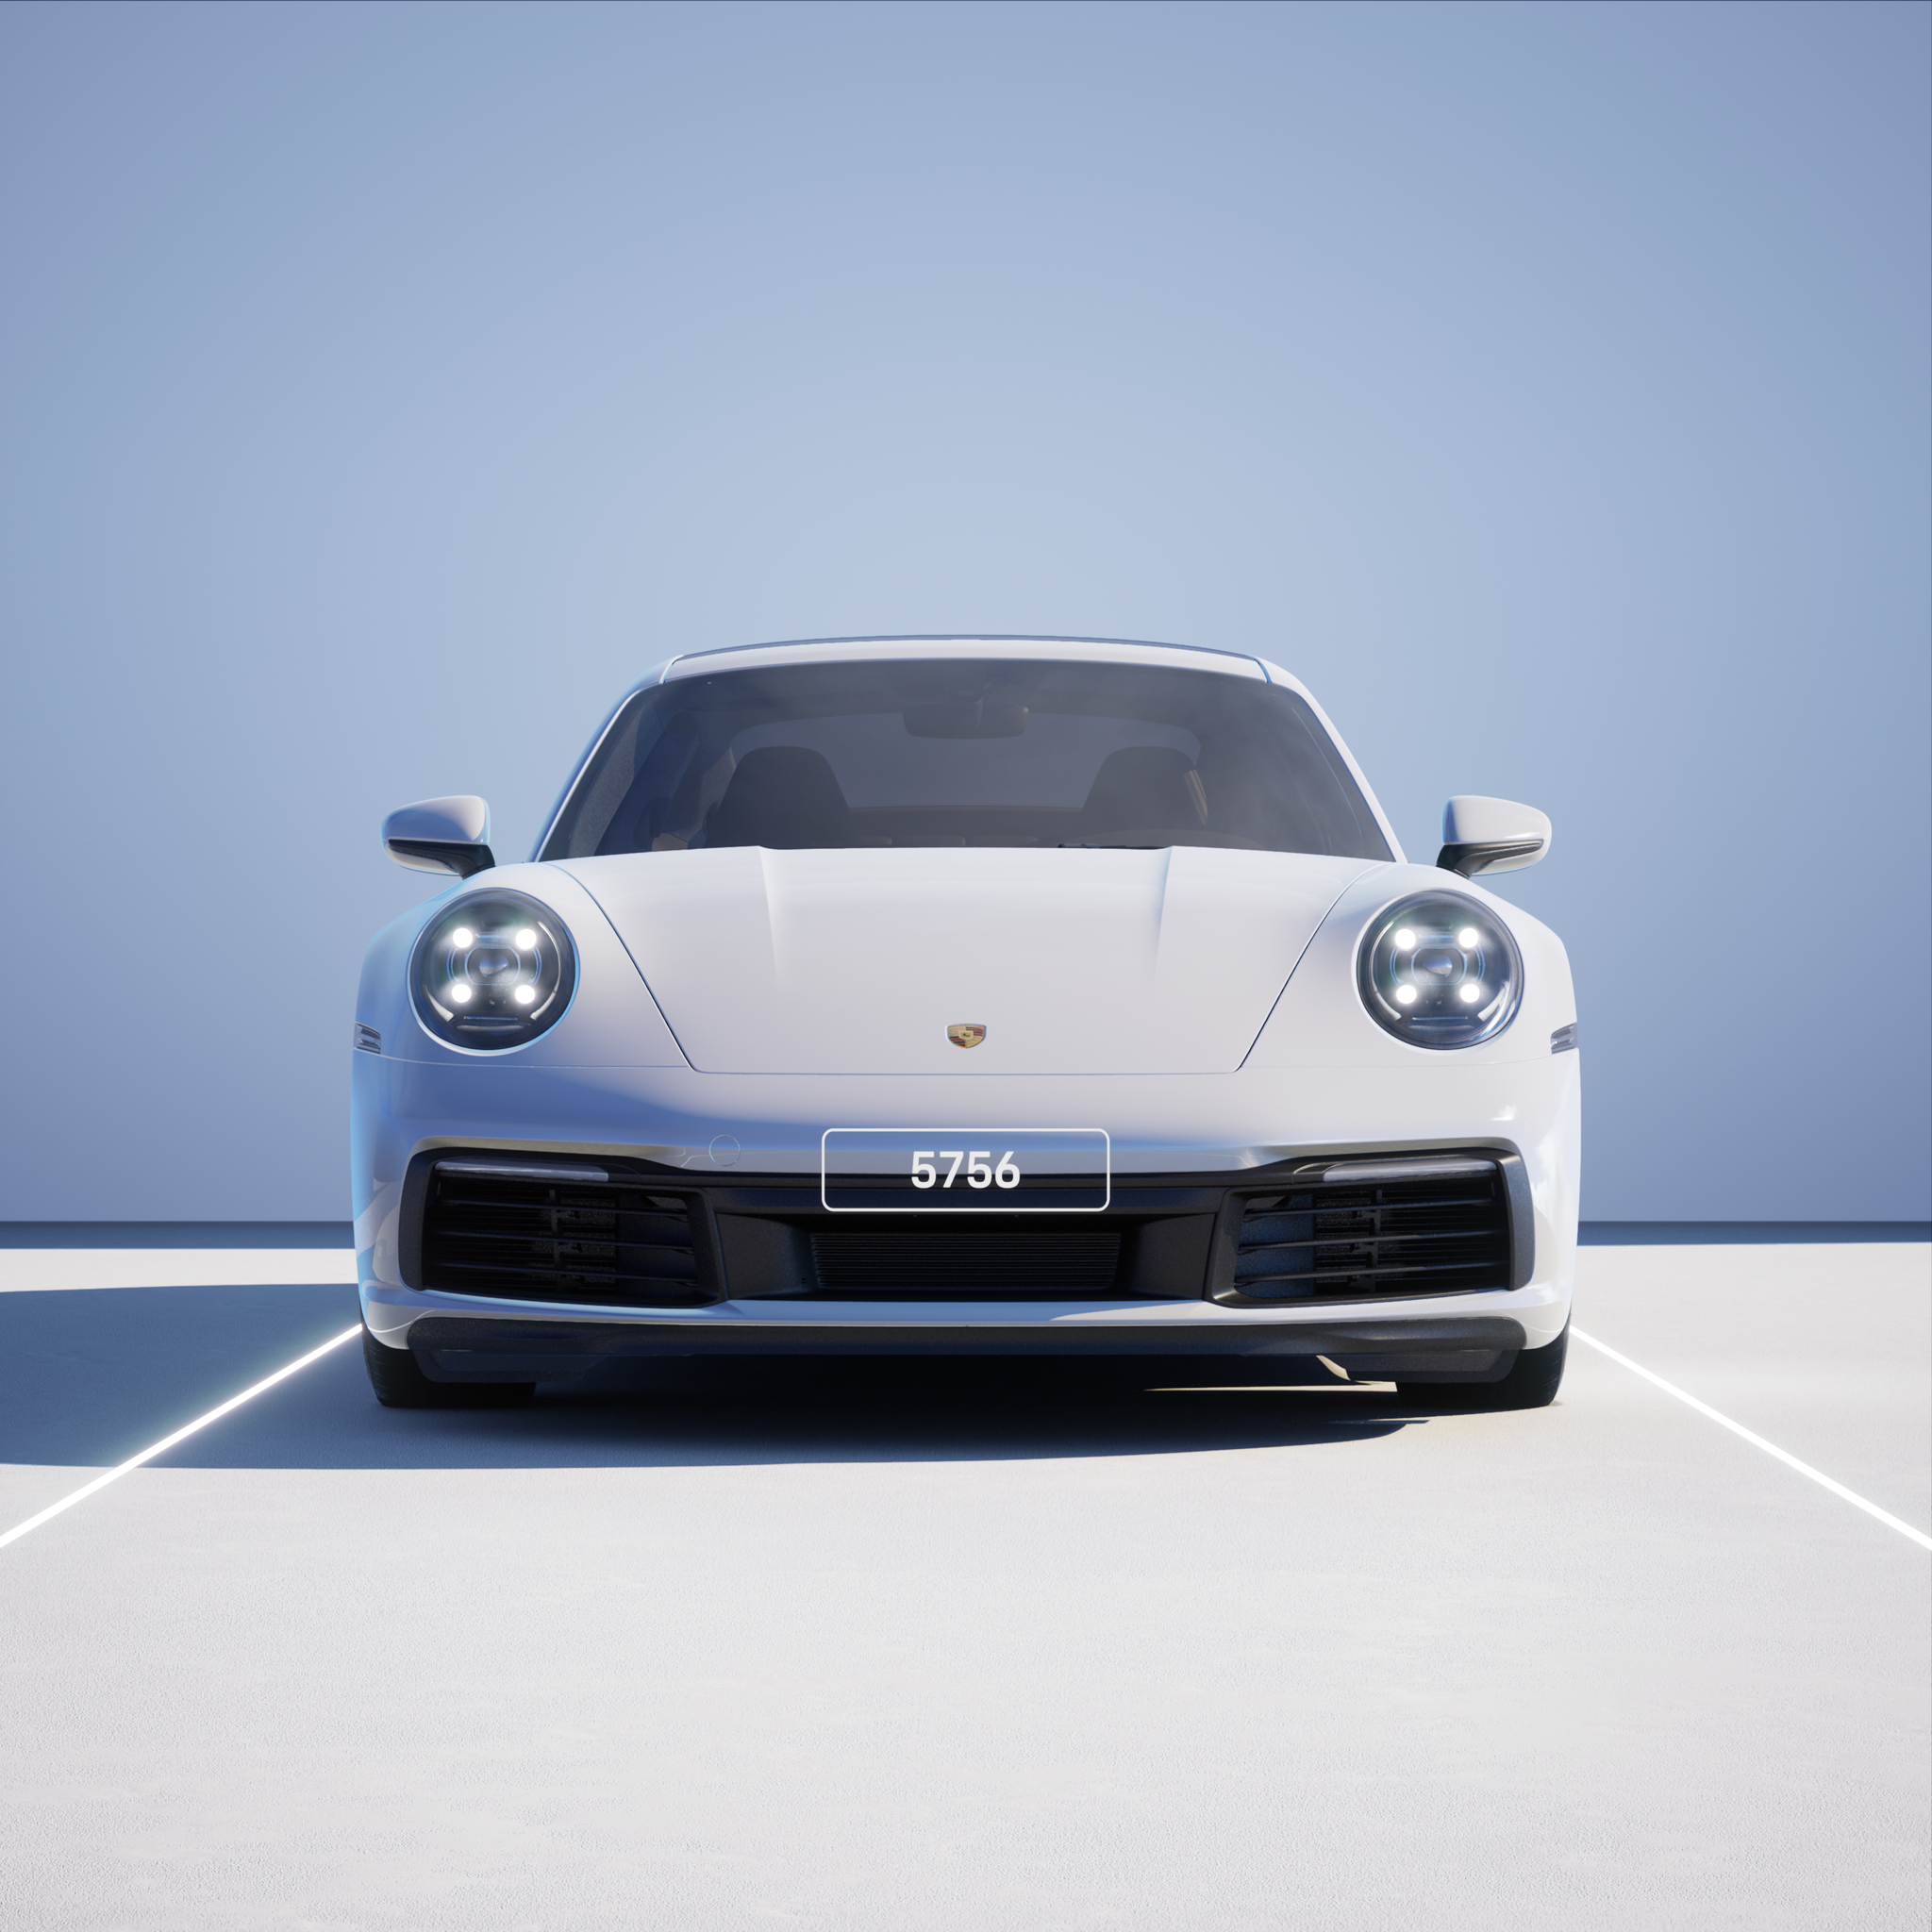 The PORSCHΞ 911 5756 image in phase